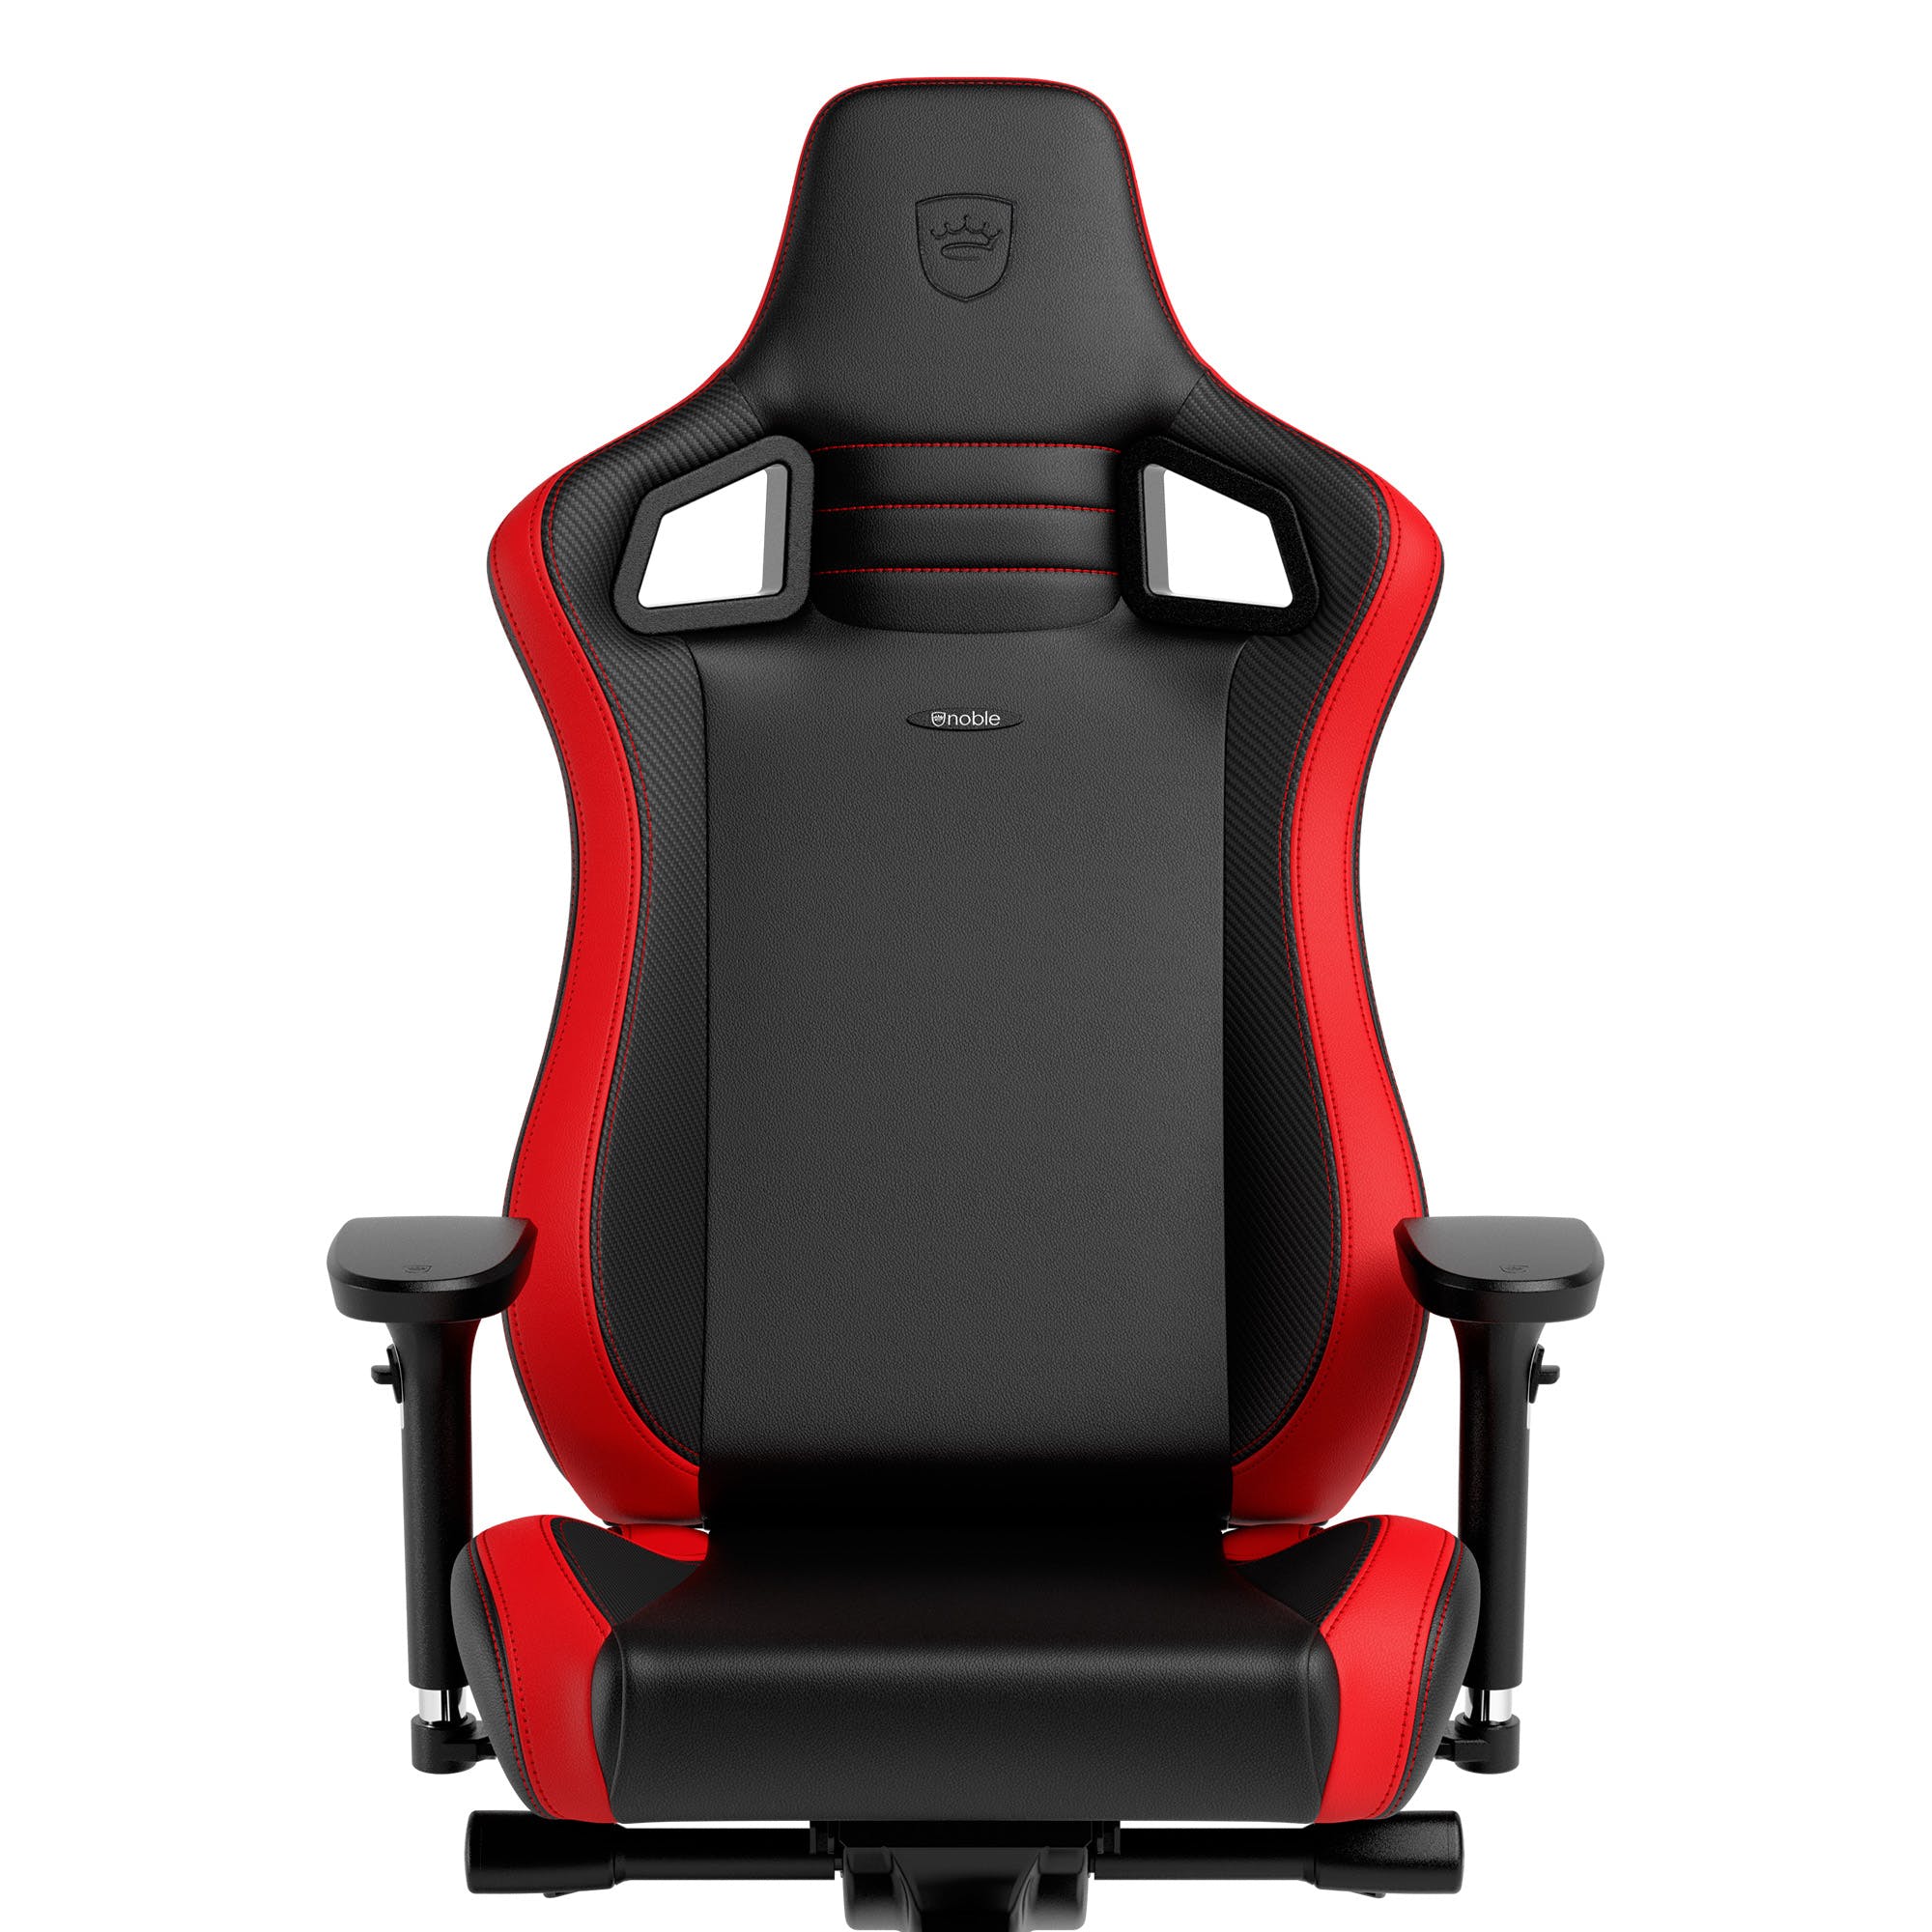 noblechairs - noblechairs EPIC Compact Gaming Chair - Carbon/Black/Red